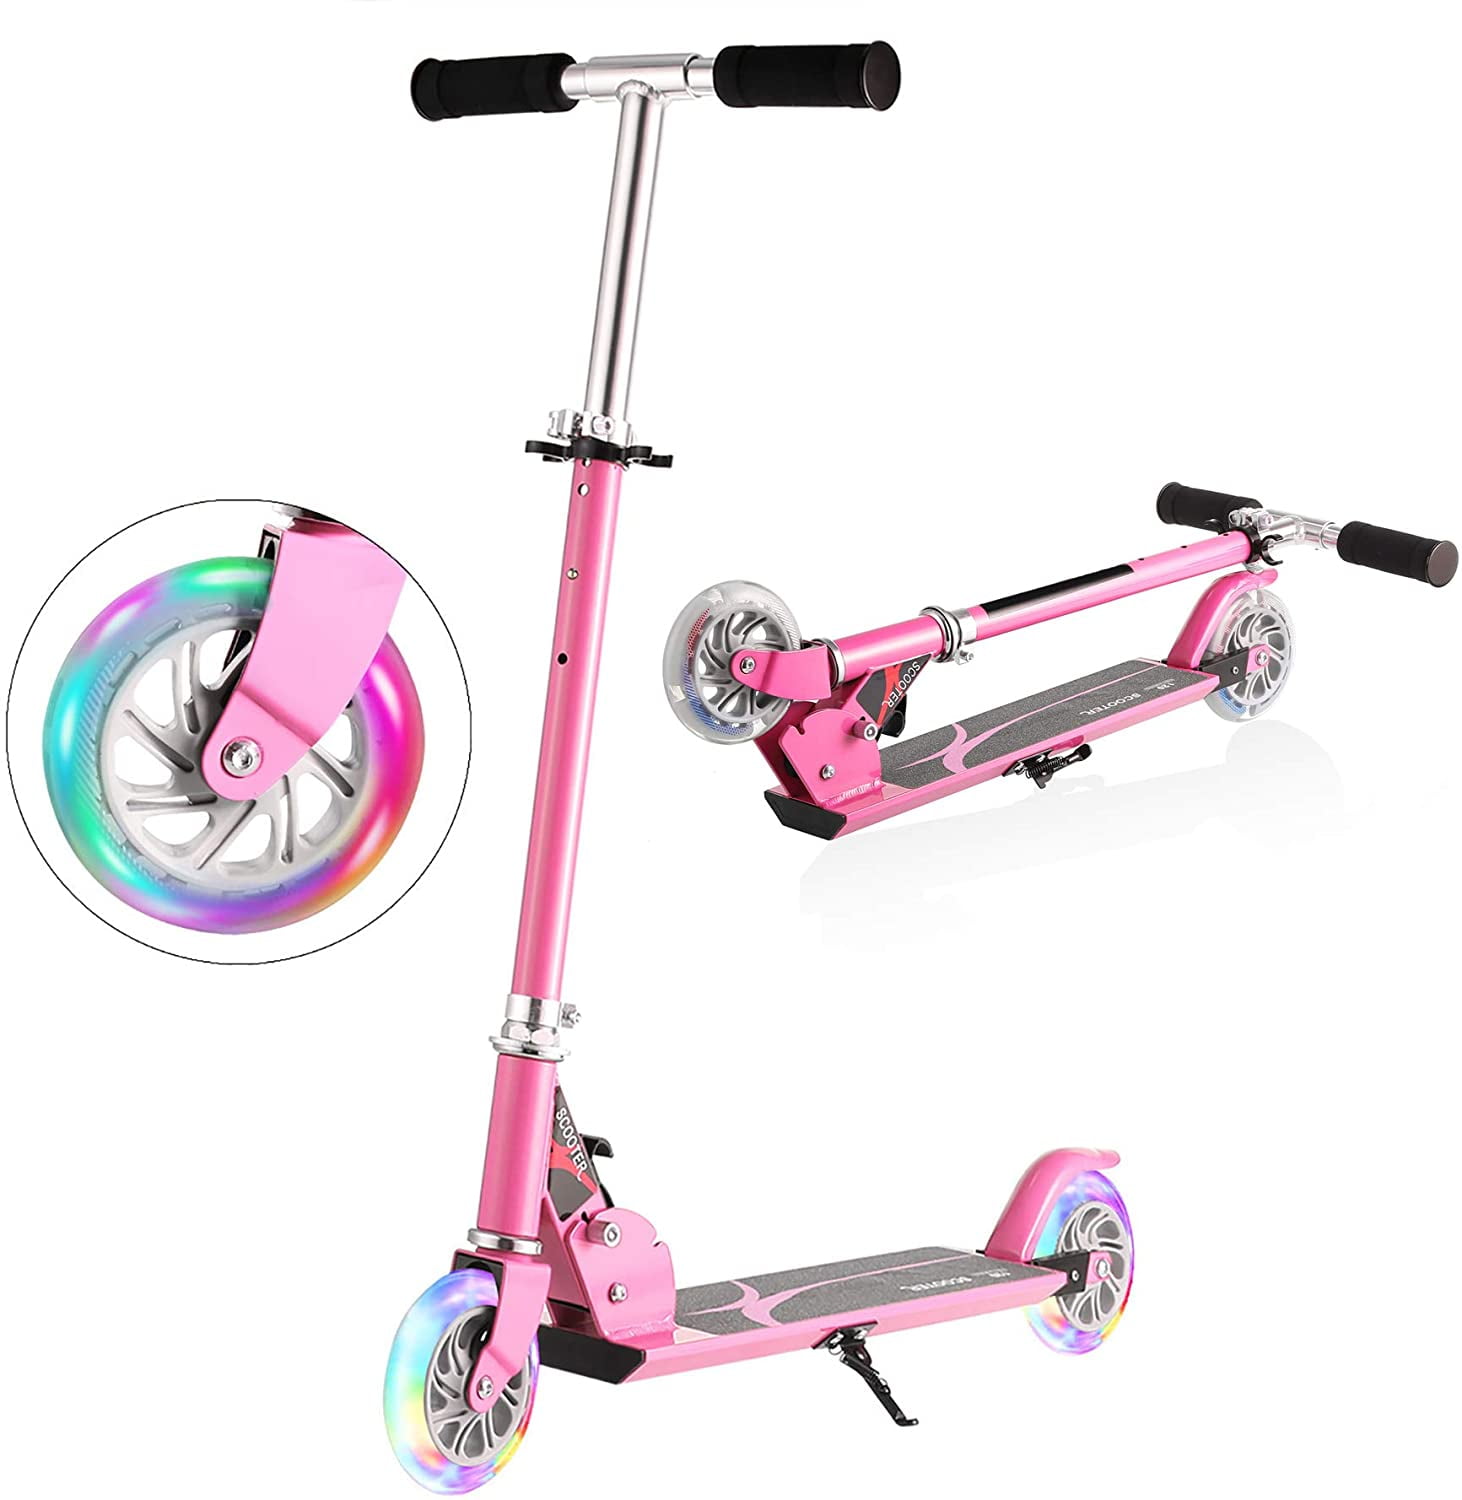 2 Wheel Kick Scooters for Kids 8 Years and Up with Quick Release Folding System Kicksy Wheels Scooter for Kids Ages 6-12 Teens 12 Years and Up and Adults 